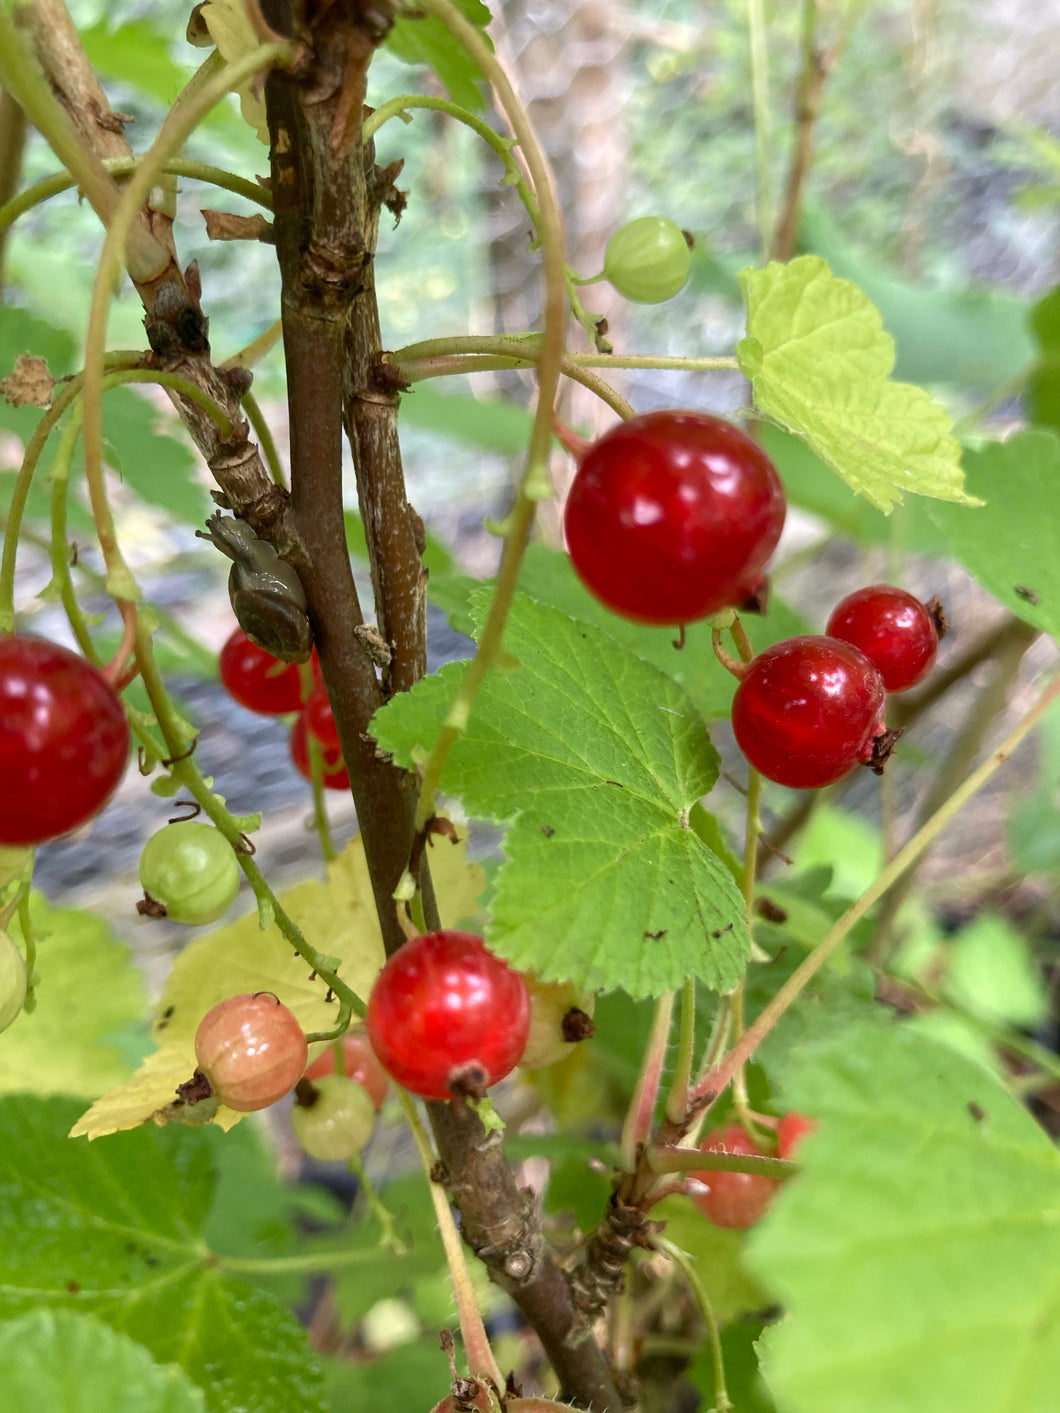 1 plug/young transplant of Redcurrant for Grow-Your-Own Includes Postage